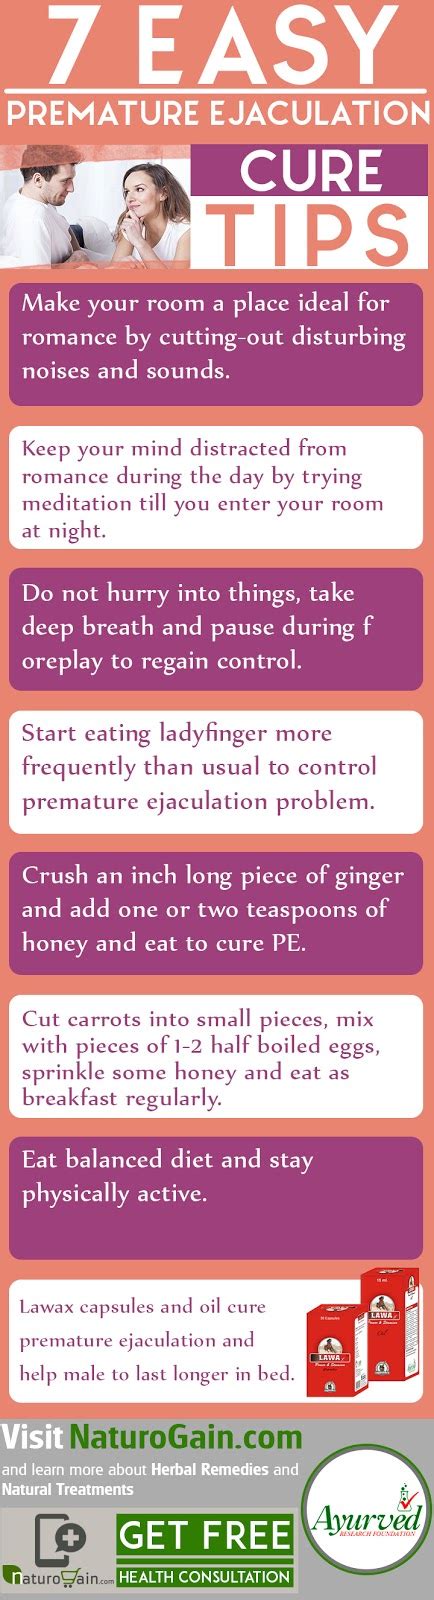 10 foods that will help treat premature ejaculation Premature Ejaculation Cure Tips and Home Remedies that Work